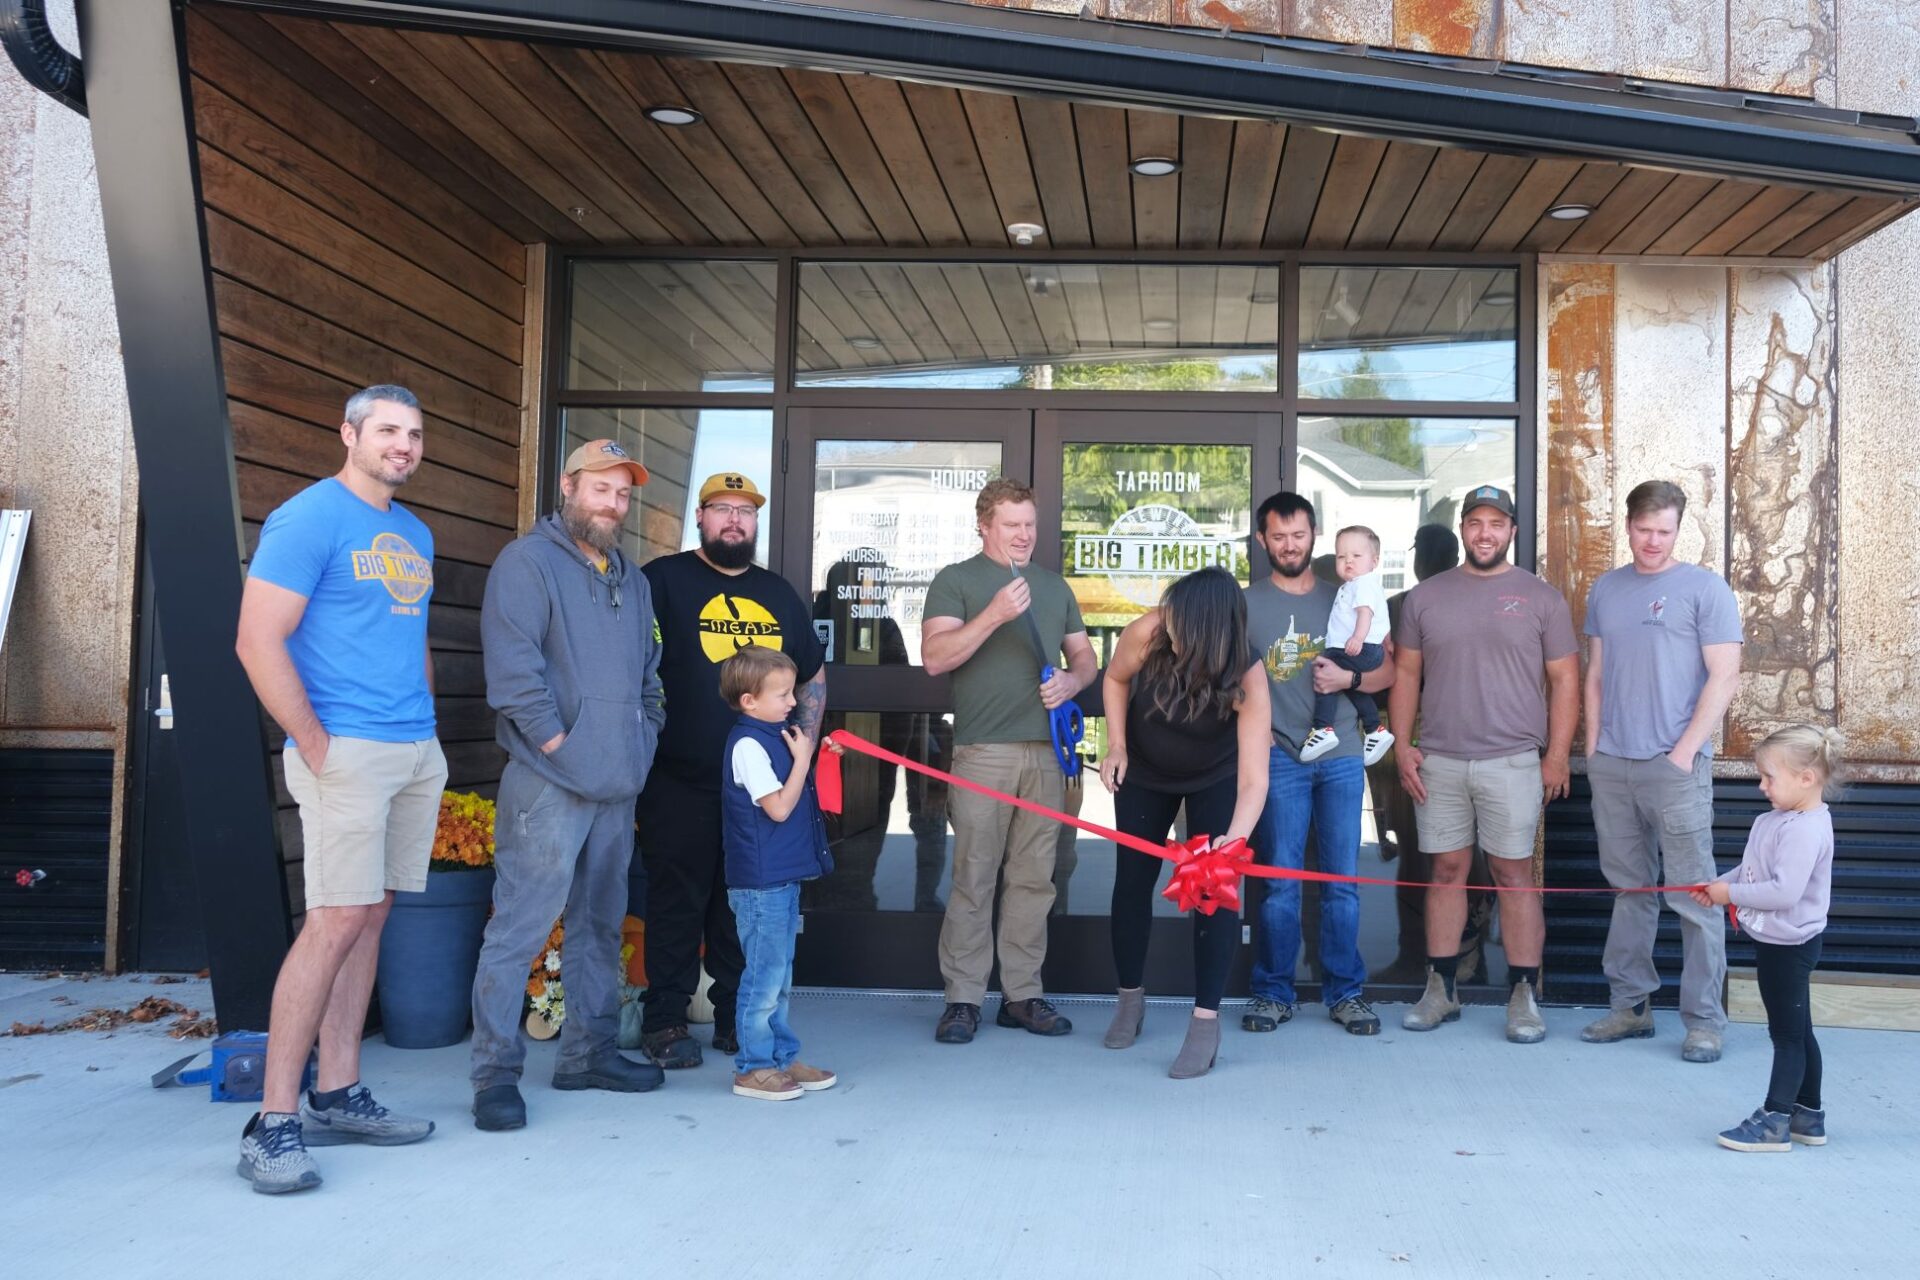 Ribbon Cutting Ceremony for Big Timber - 01